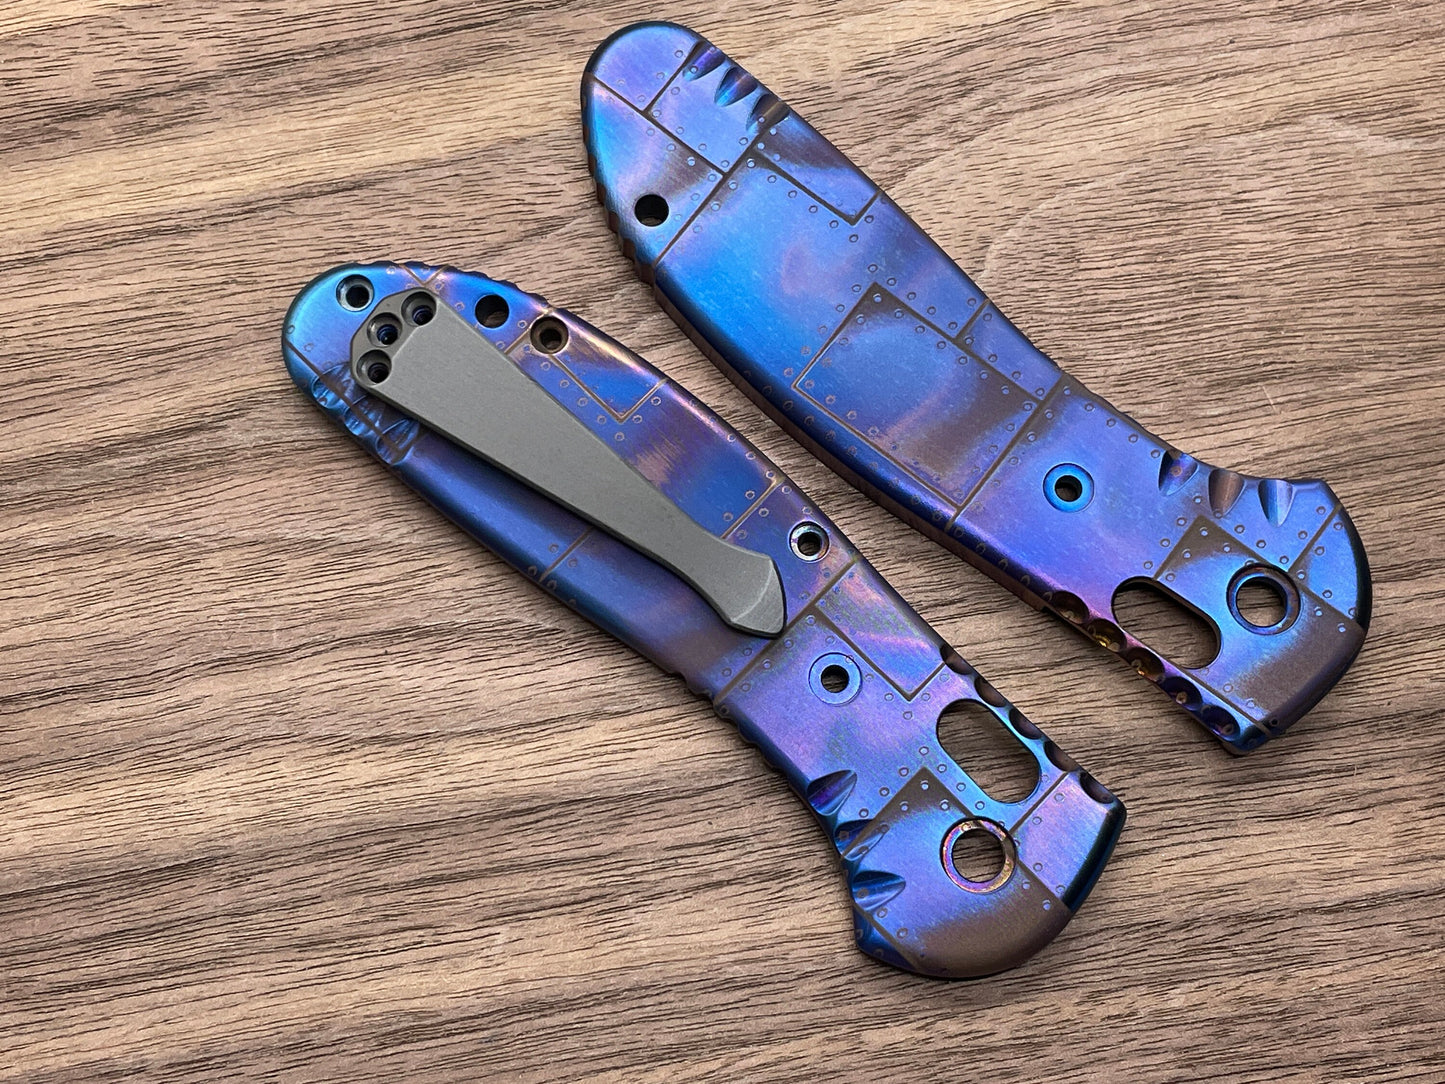 Flamed RIVETED Airplane Titanium Scales for Benchmade GRIPTILIAN 551 & 550